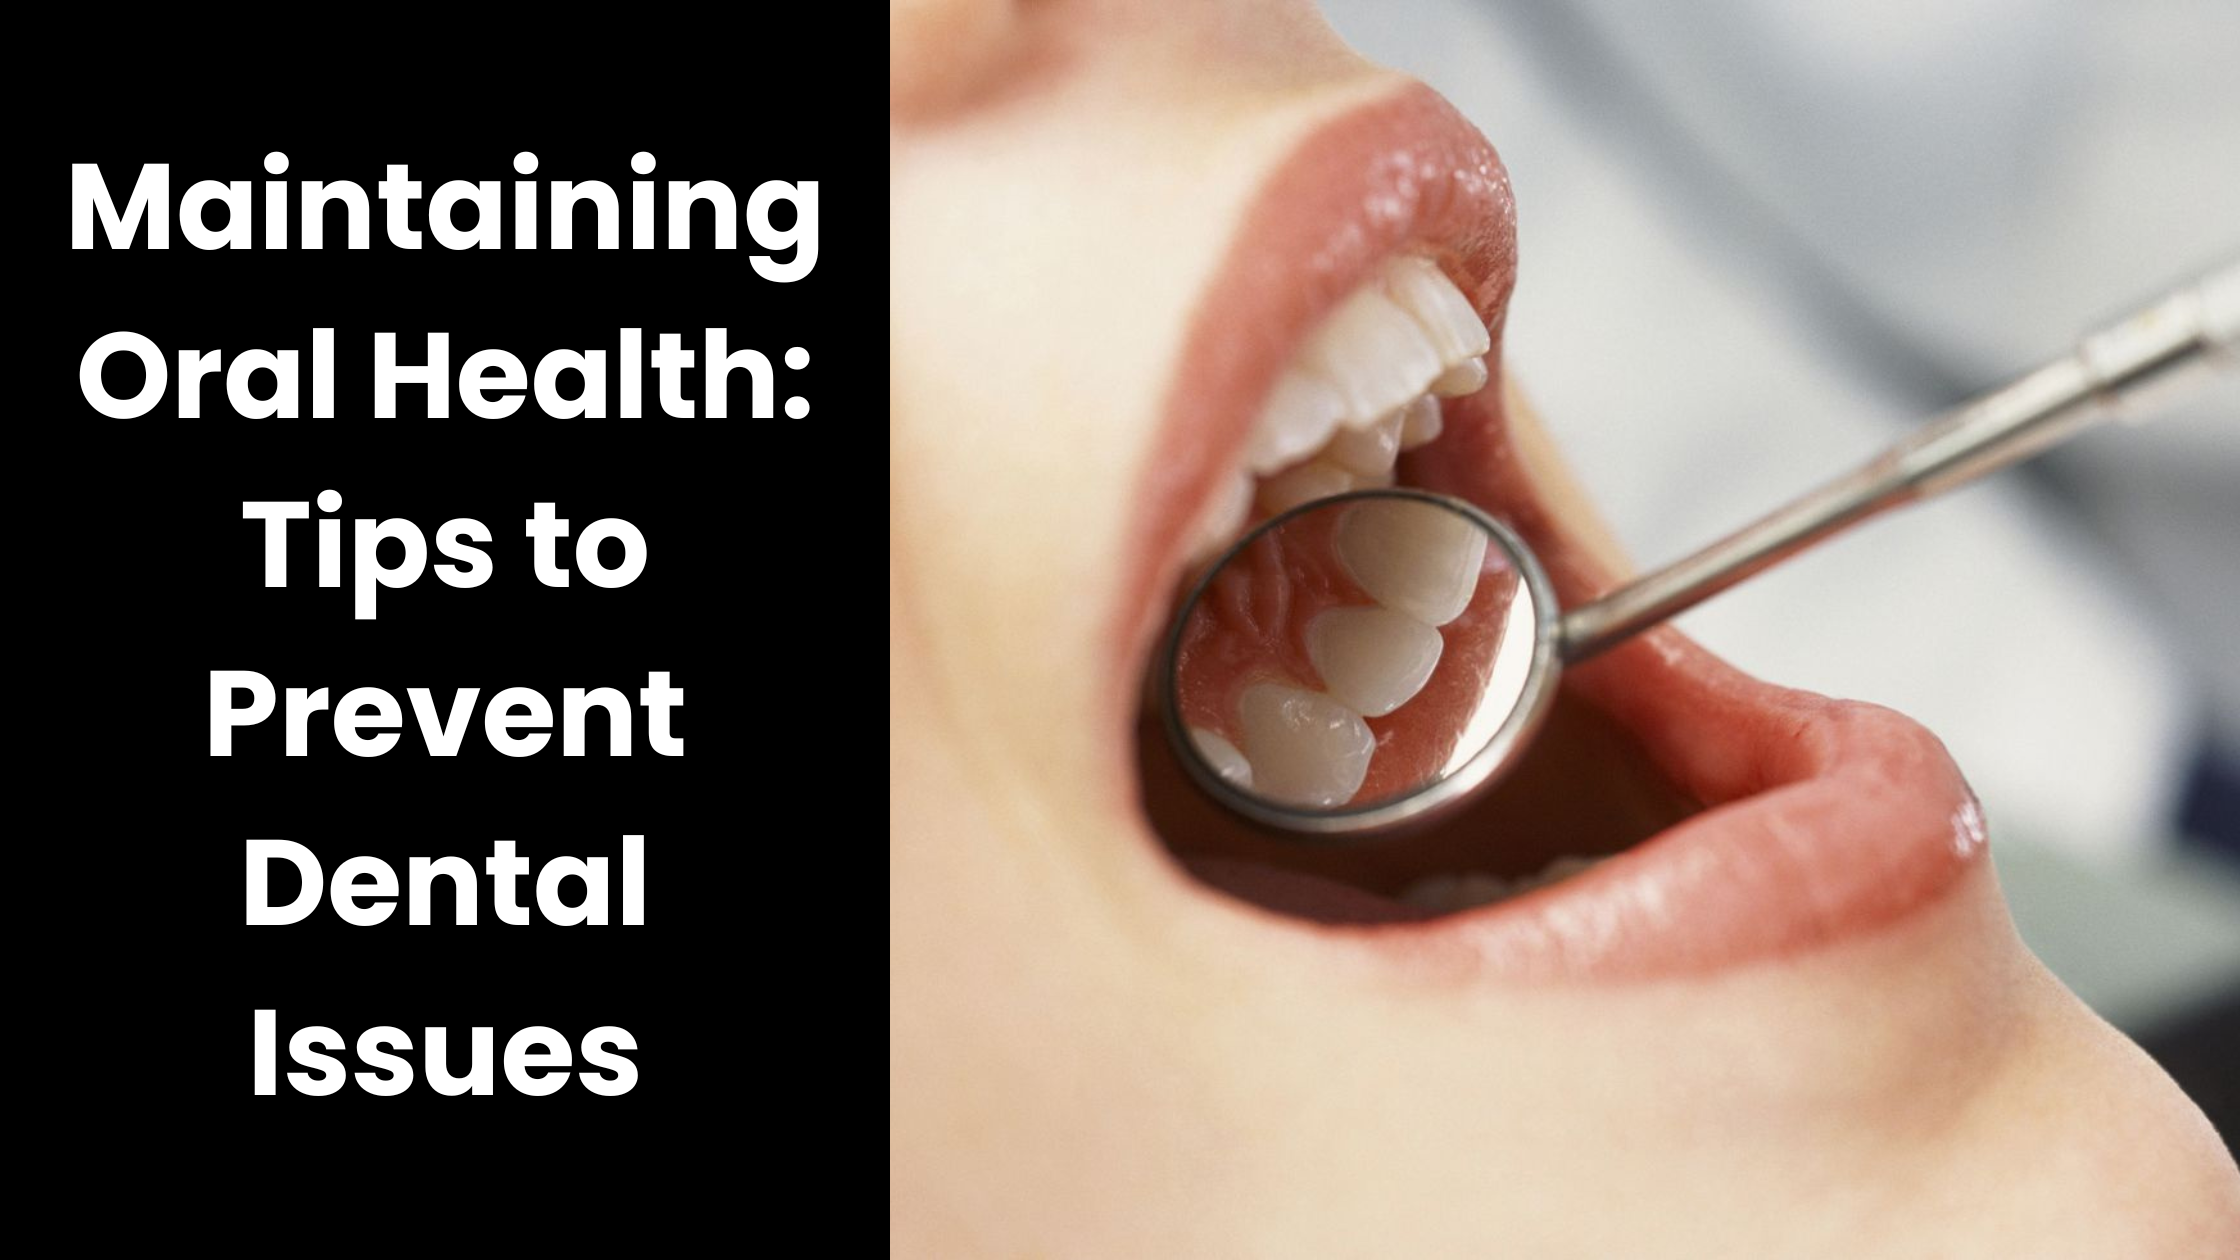 Maintaining Oral Health Tips to Prevent Dental Issues